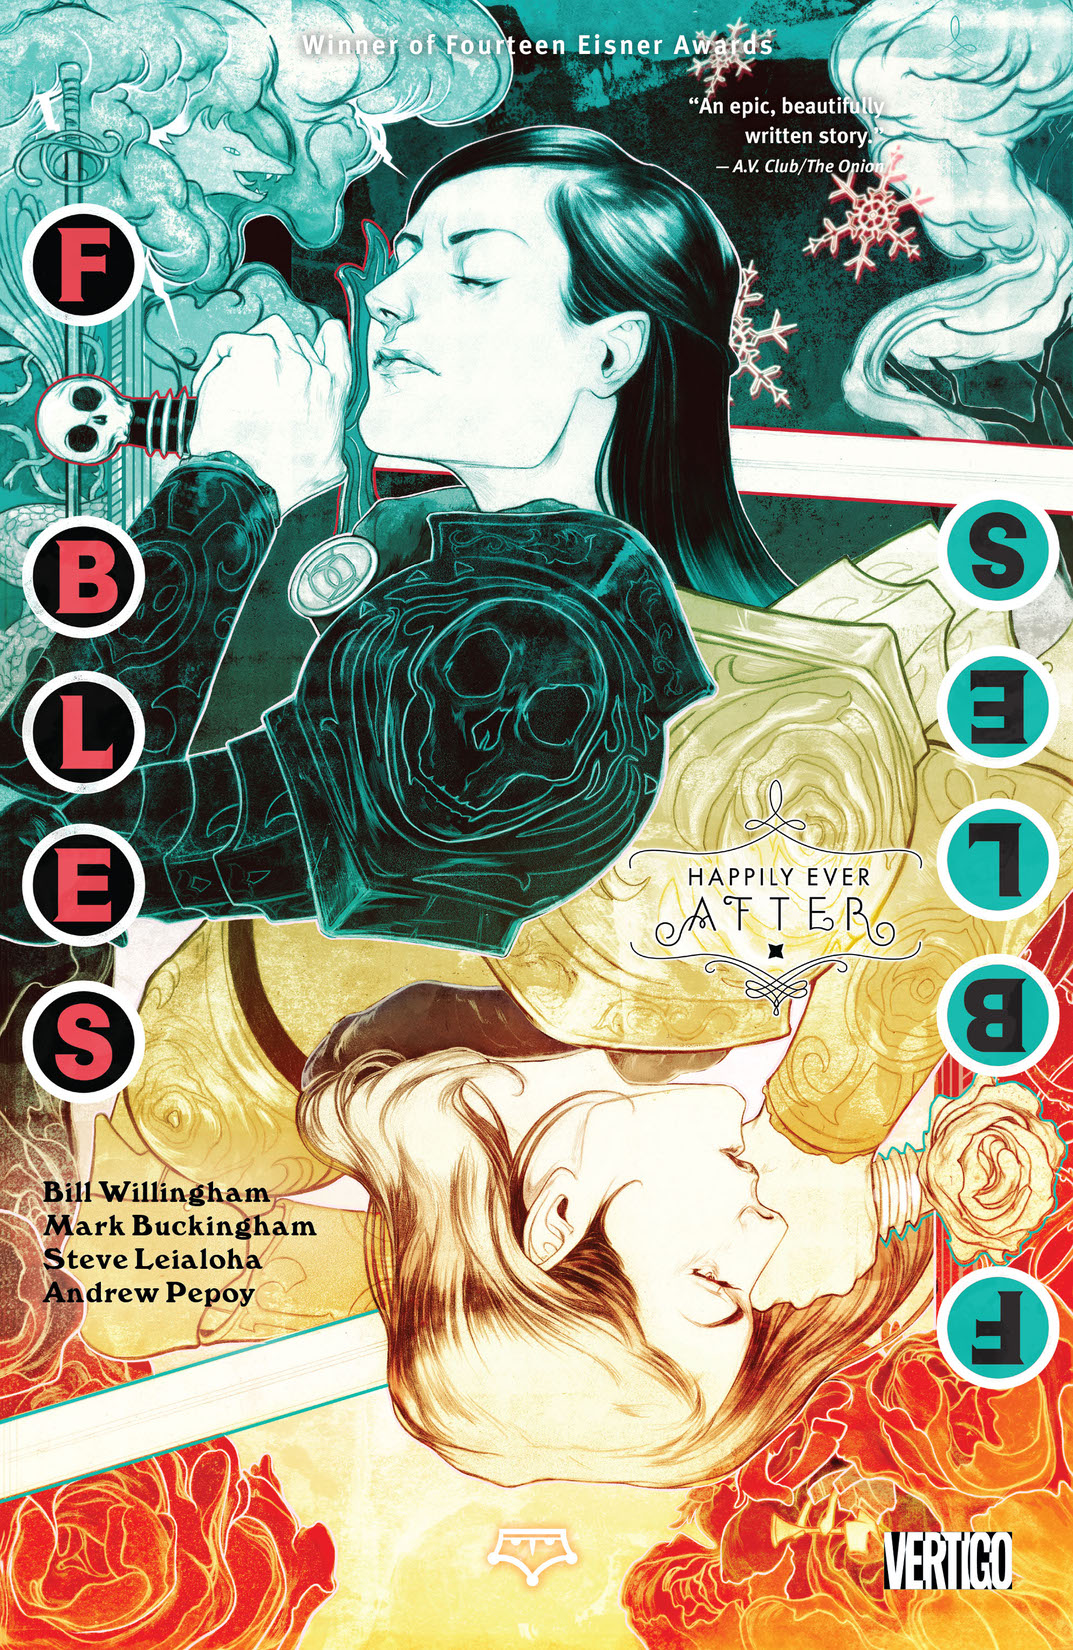 Fables Vol. 21: Happily Ever After preview images